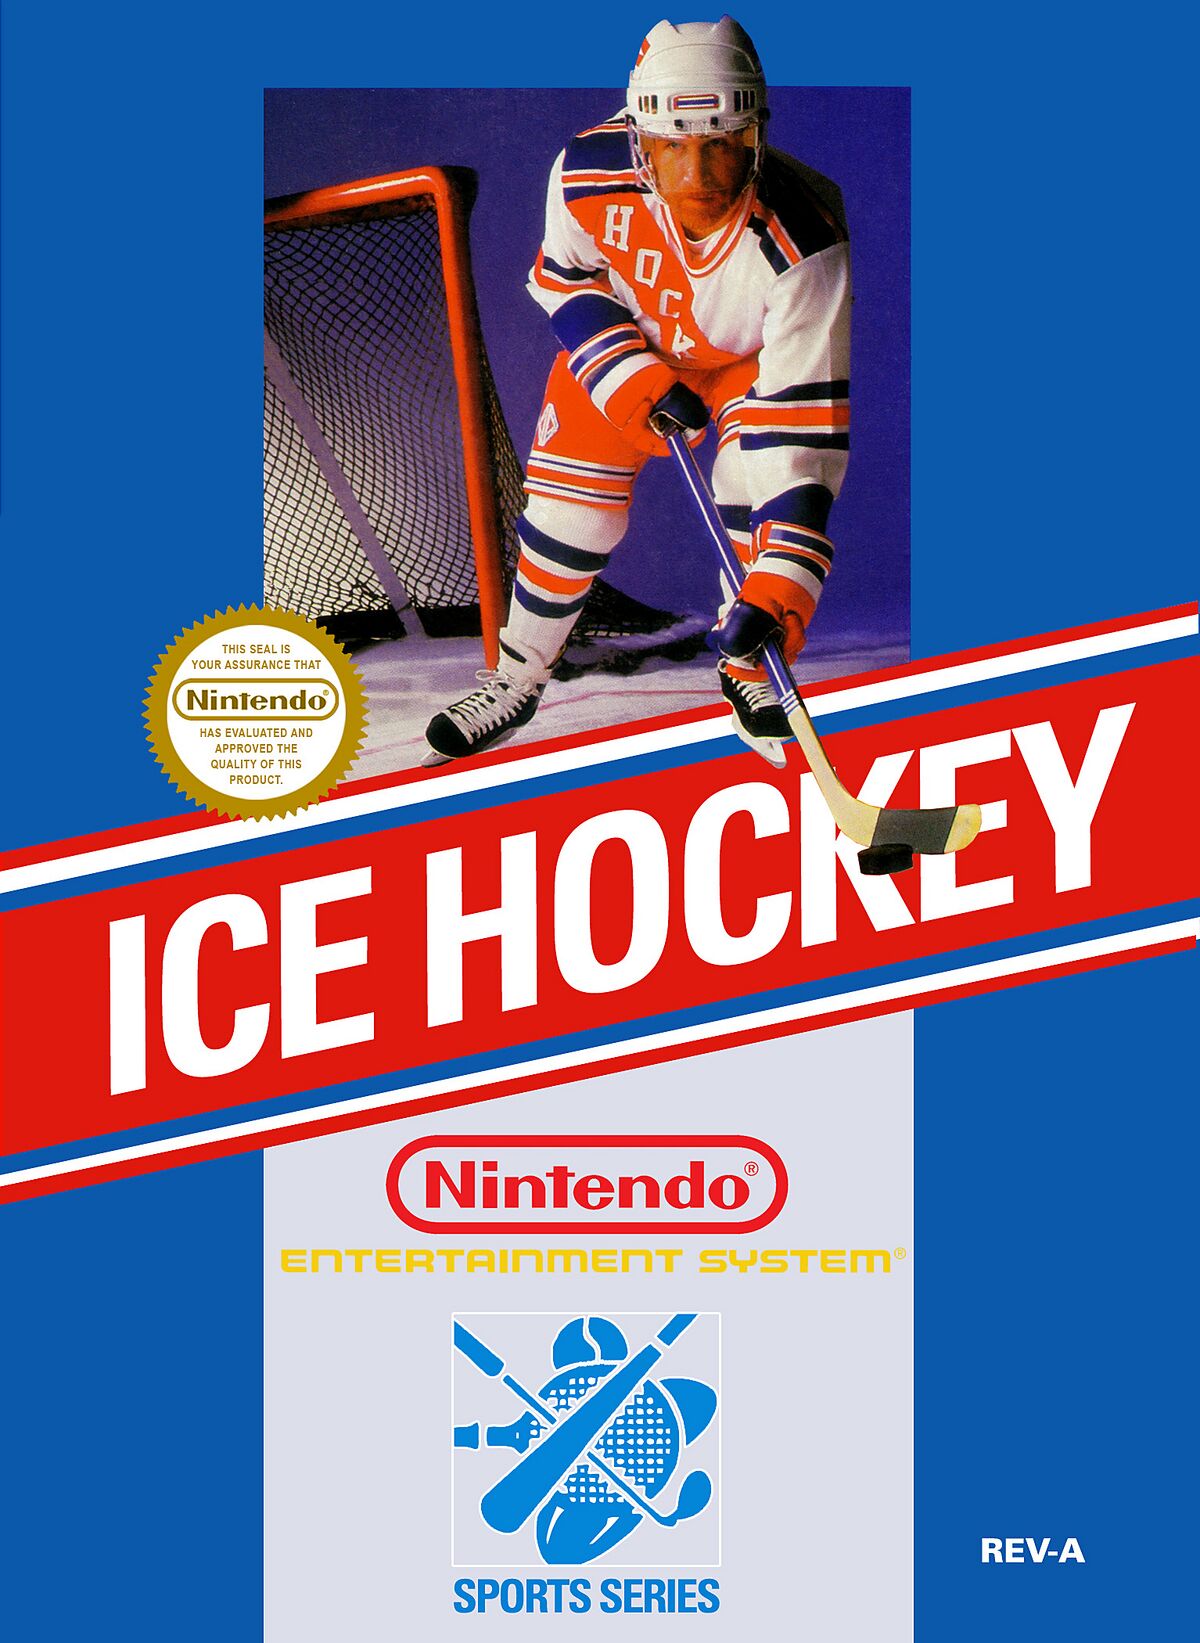 Ice Hockey (NES) — StrategyWiki Strategy guide and game reference wiki